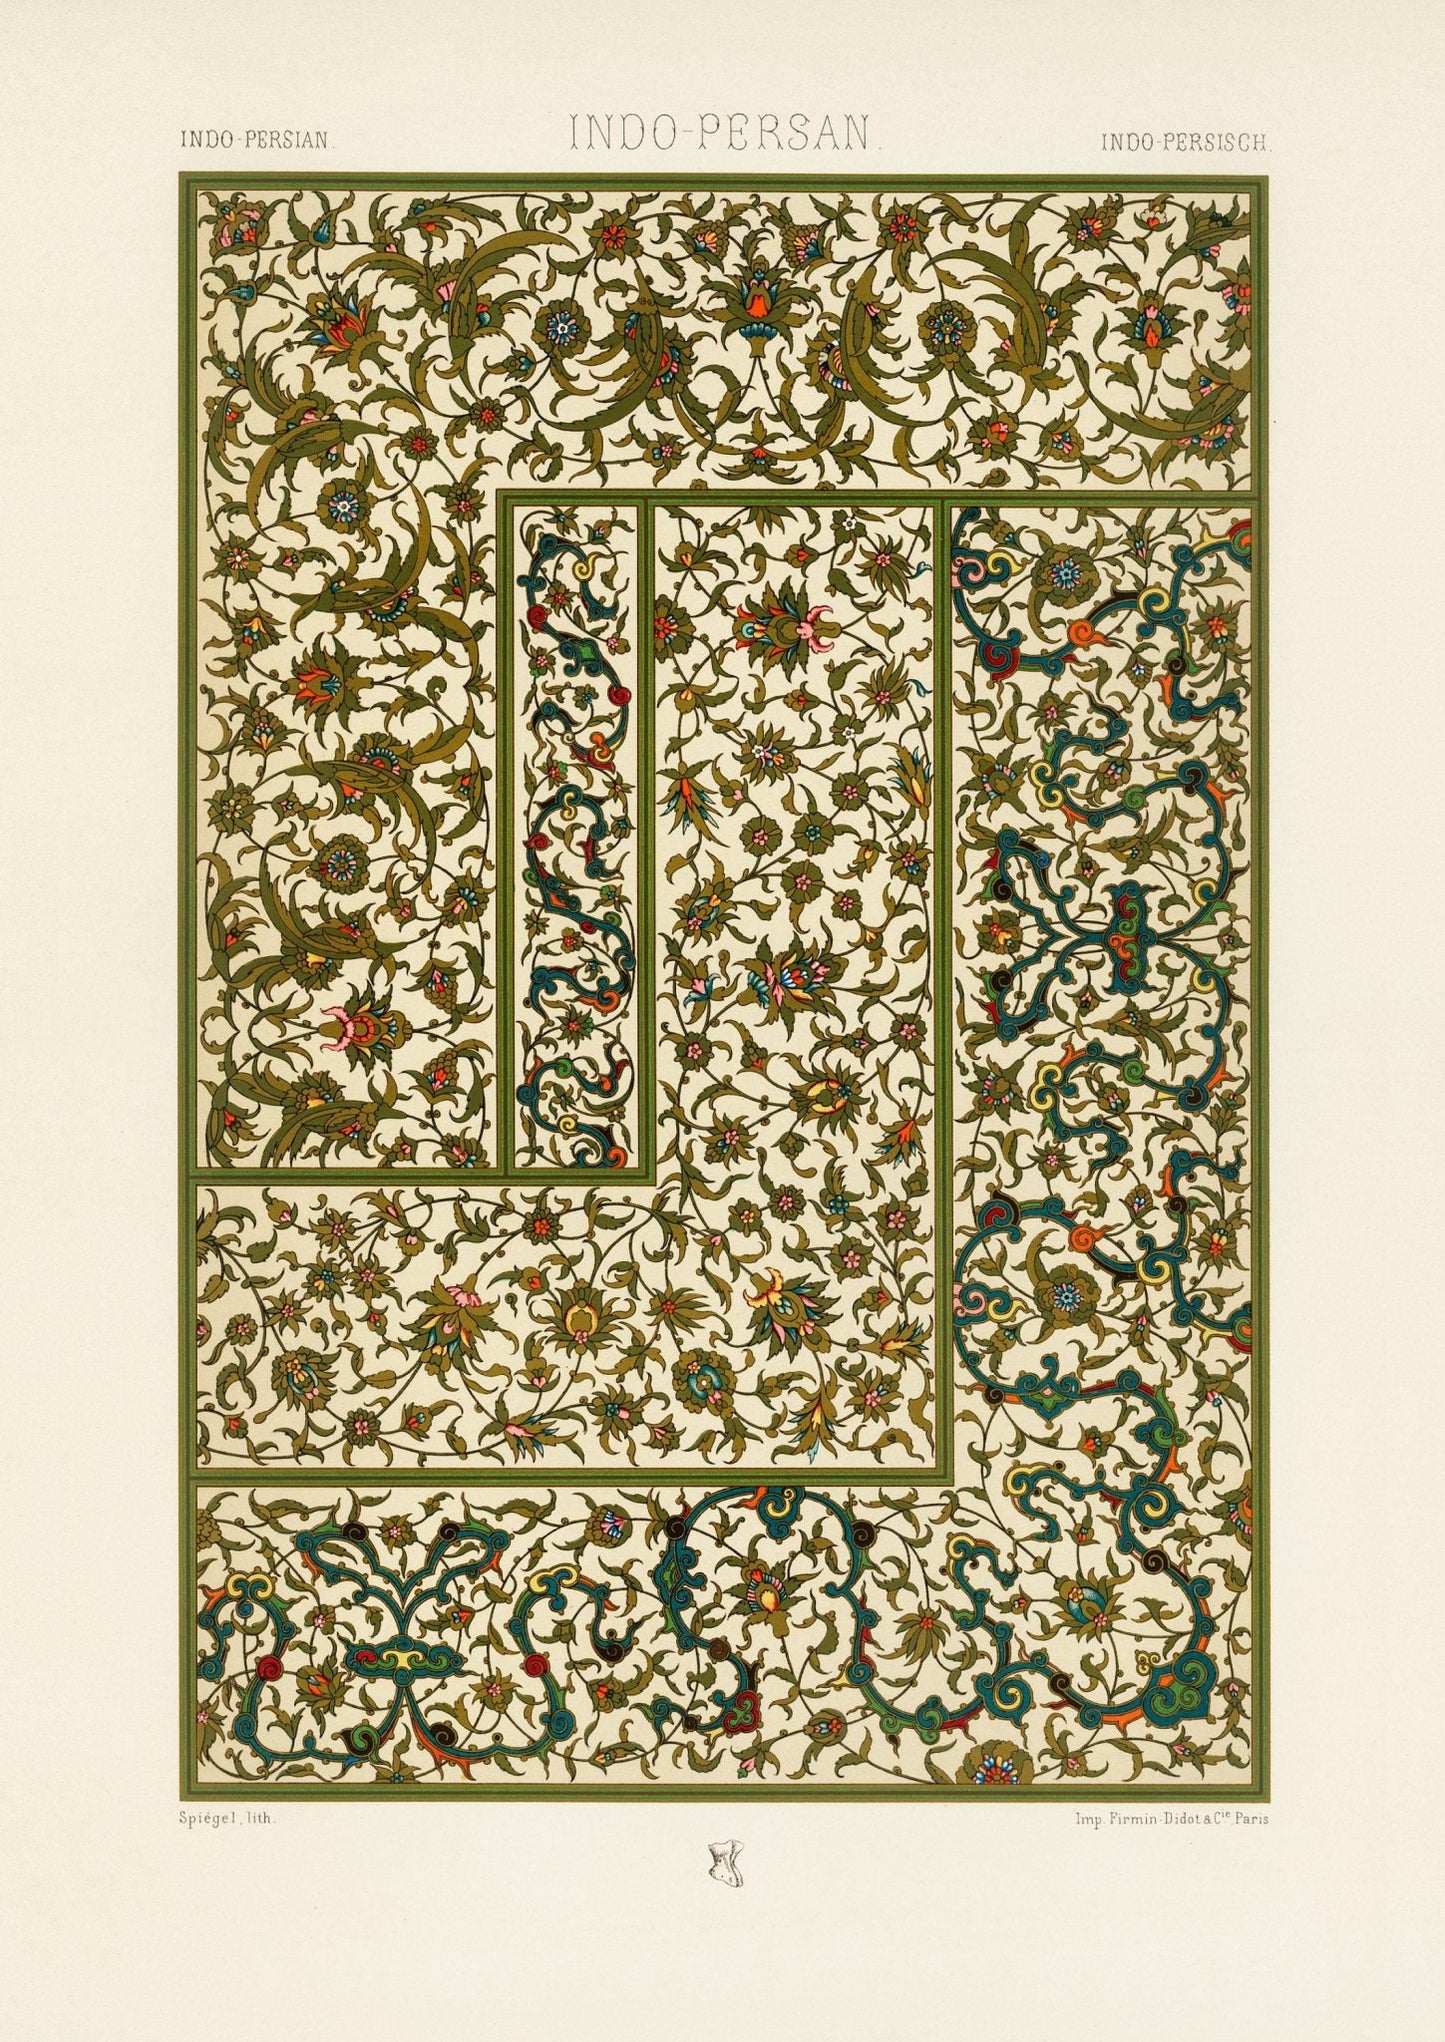 ALBERT RACINET - Indo Persian Pattern Lithograph from 'L'ornement Polychrome'